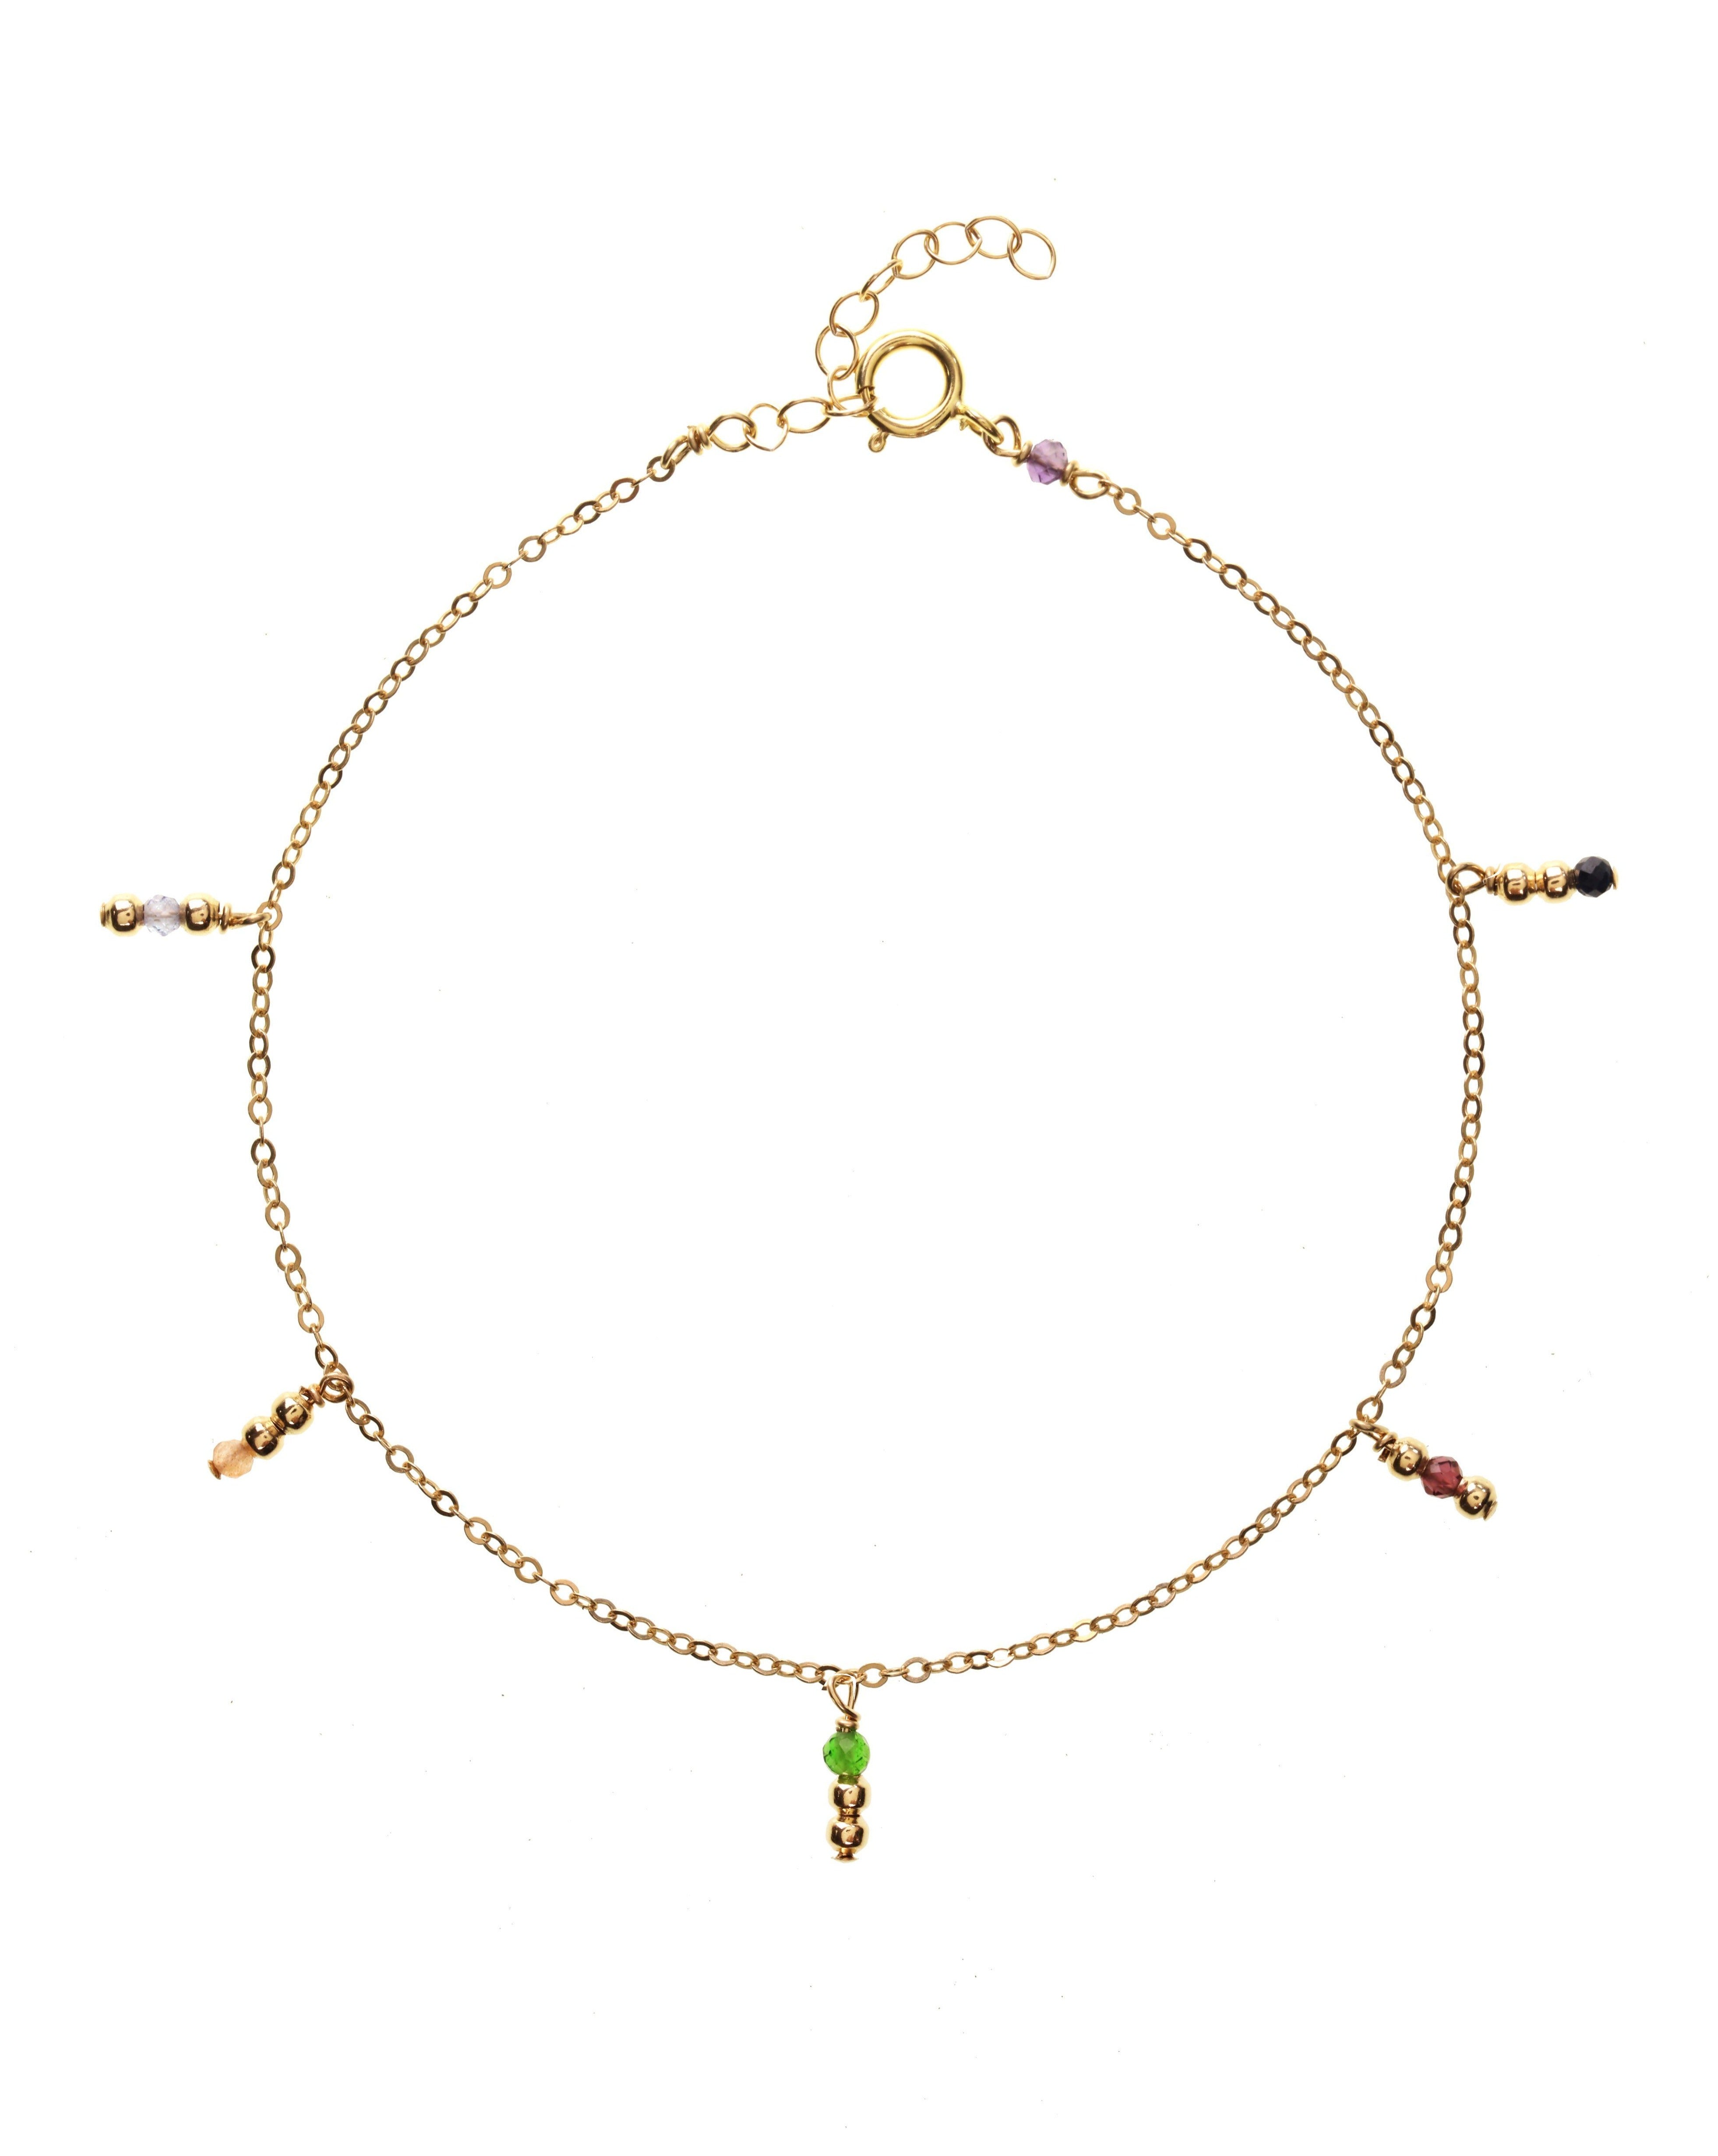 Sami Bracelet by KOZAKH. A 6 to 7 inch adjustable length bracelet, crafted in 14K Gold Filled, featuring 2mm Seamless gold beads and faceted 2mm Aquamarine, Garnet, Imperial Topaz, Emerald, Sapphire and Tanzanite. 